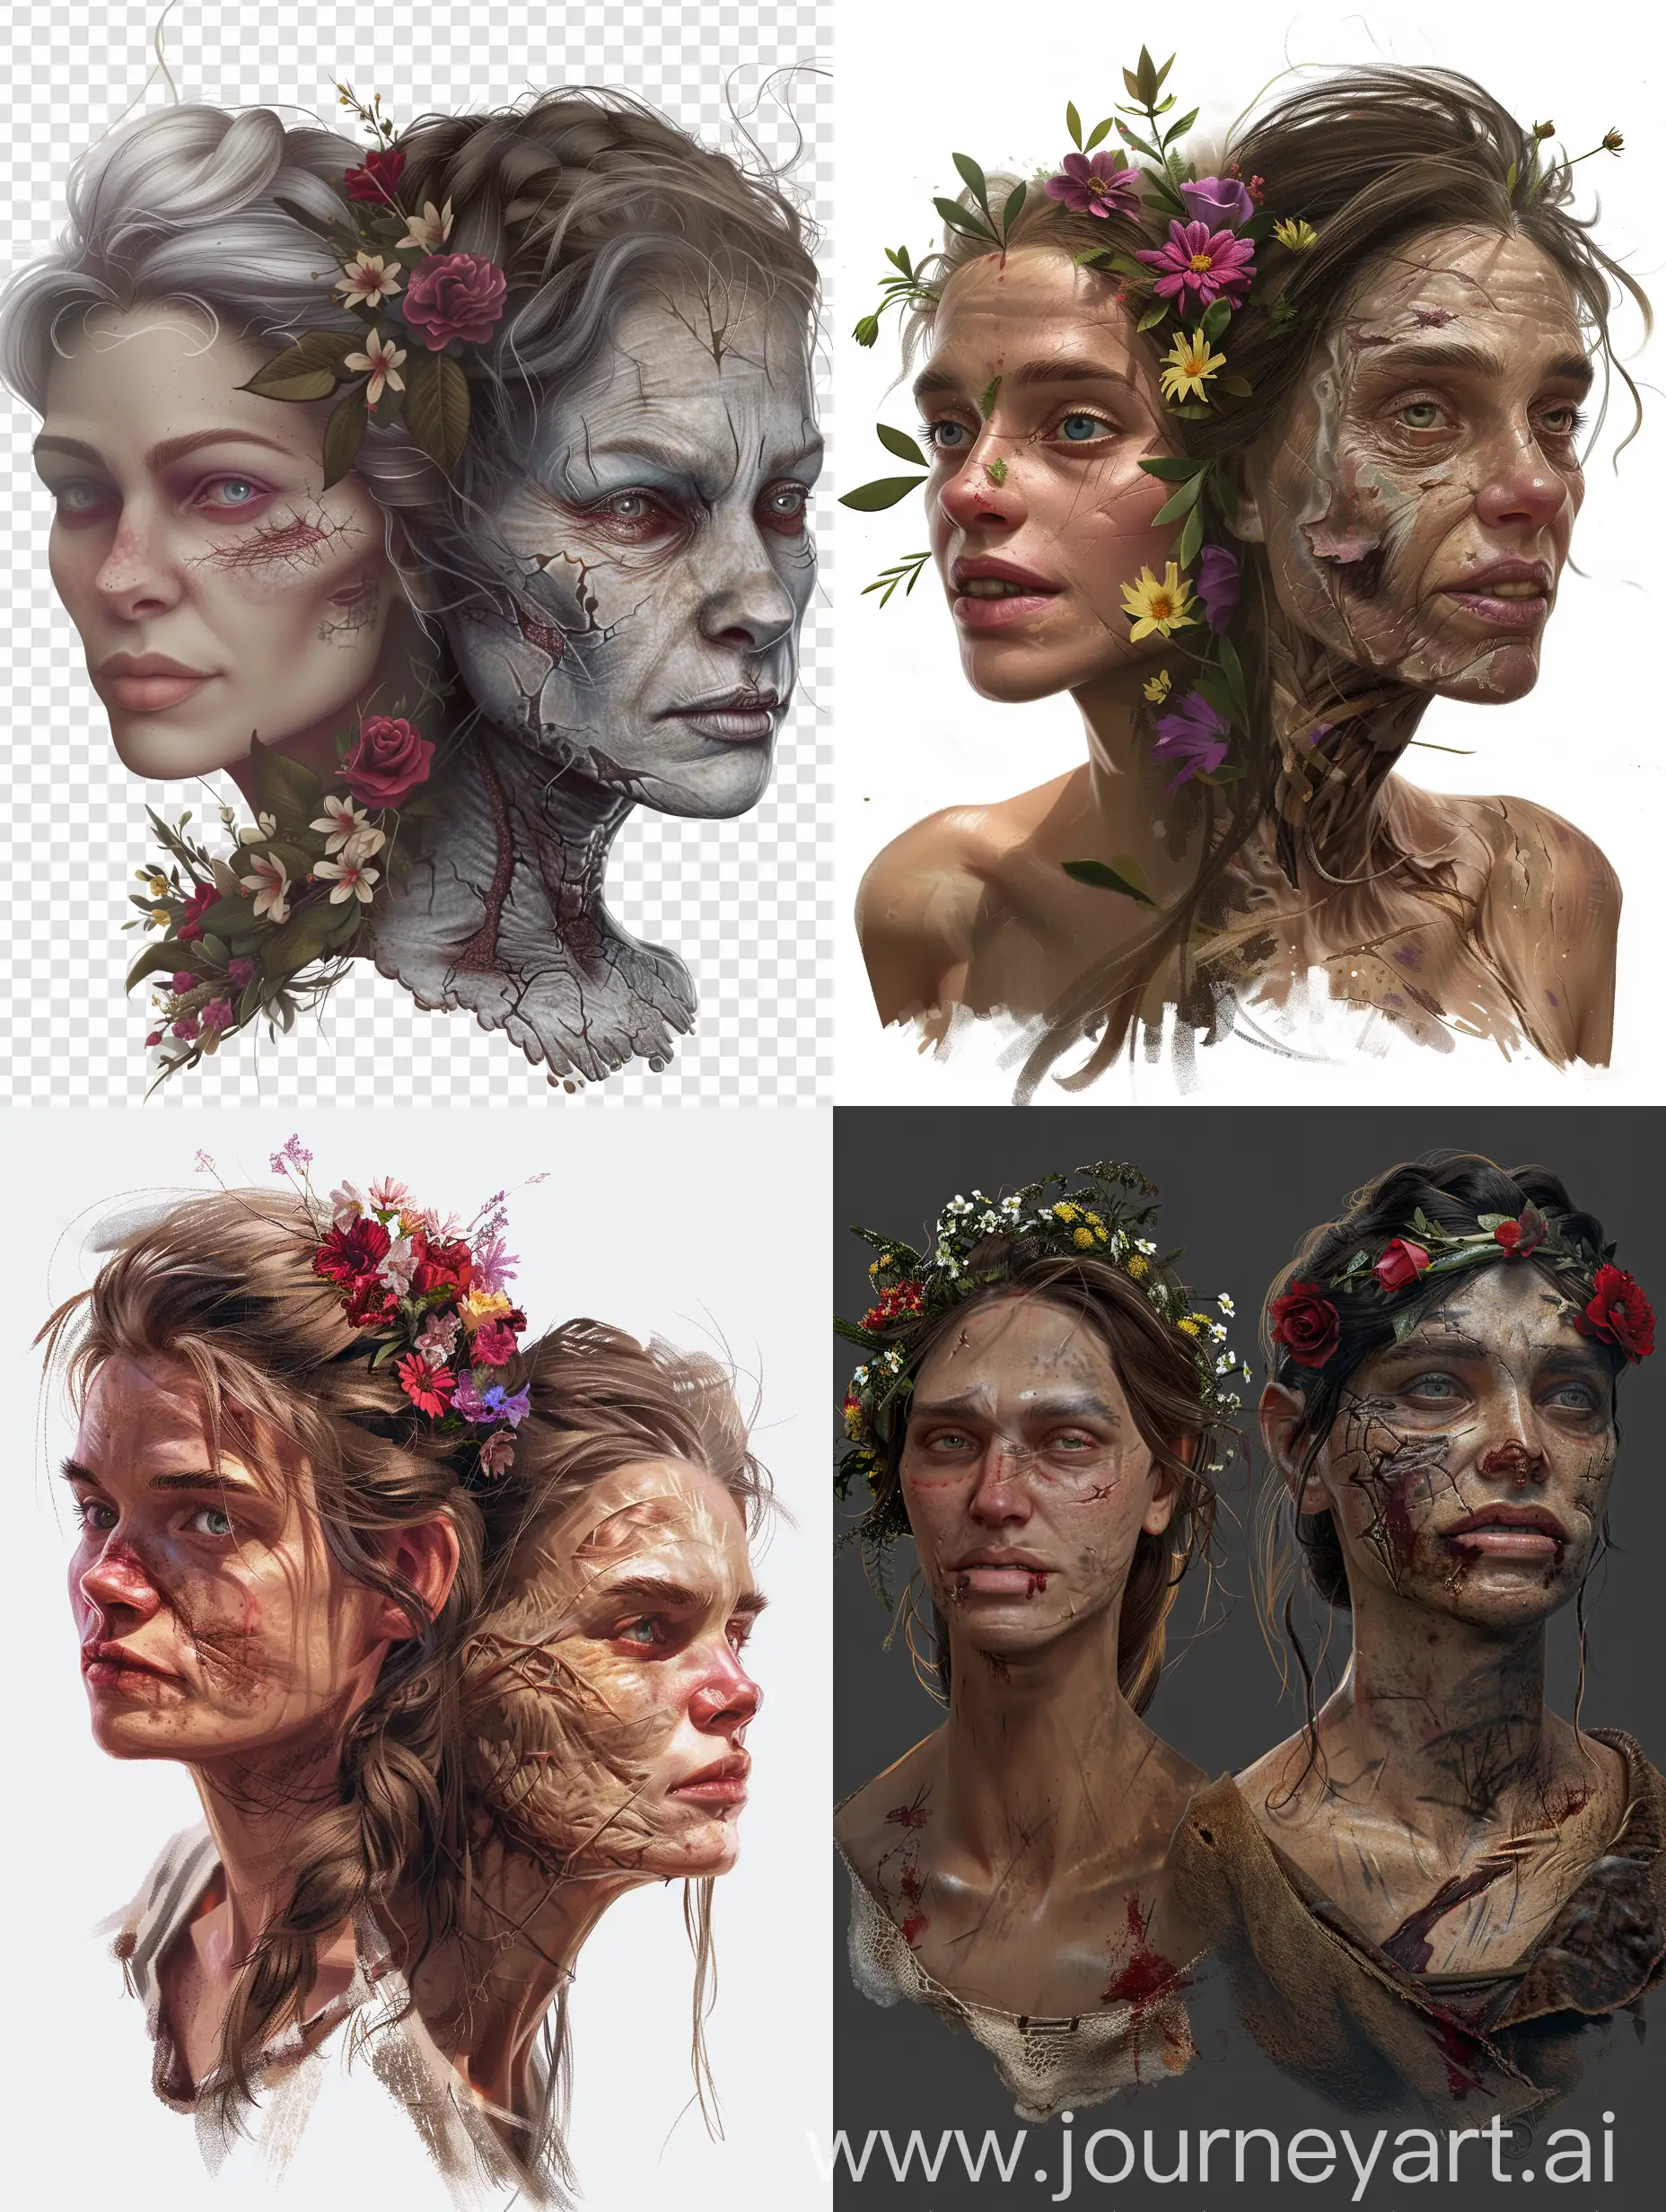 Contrasting-Emotions-Joyful-Woman-with-Flowers-and-Weary-Woman-with-Scars